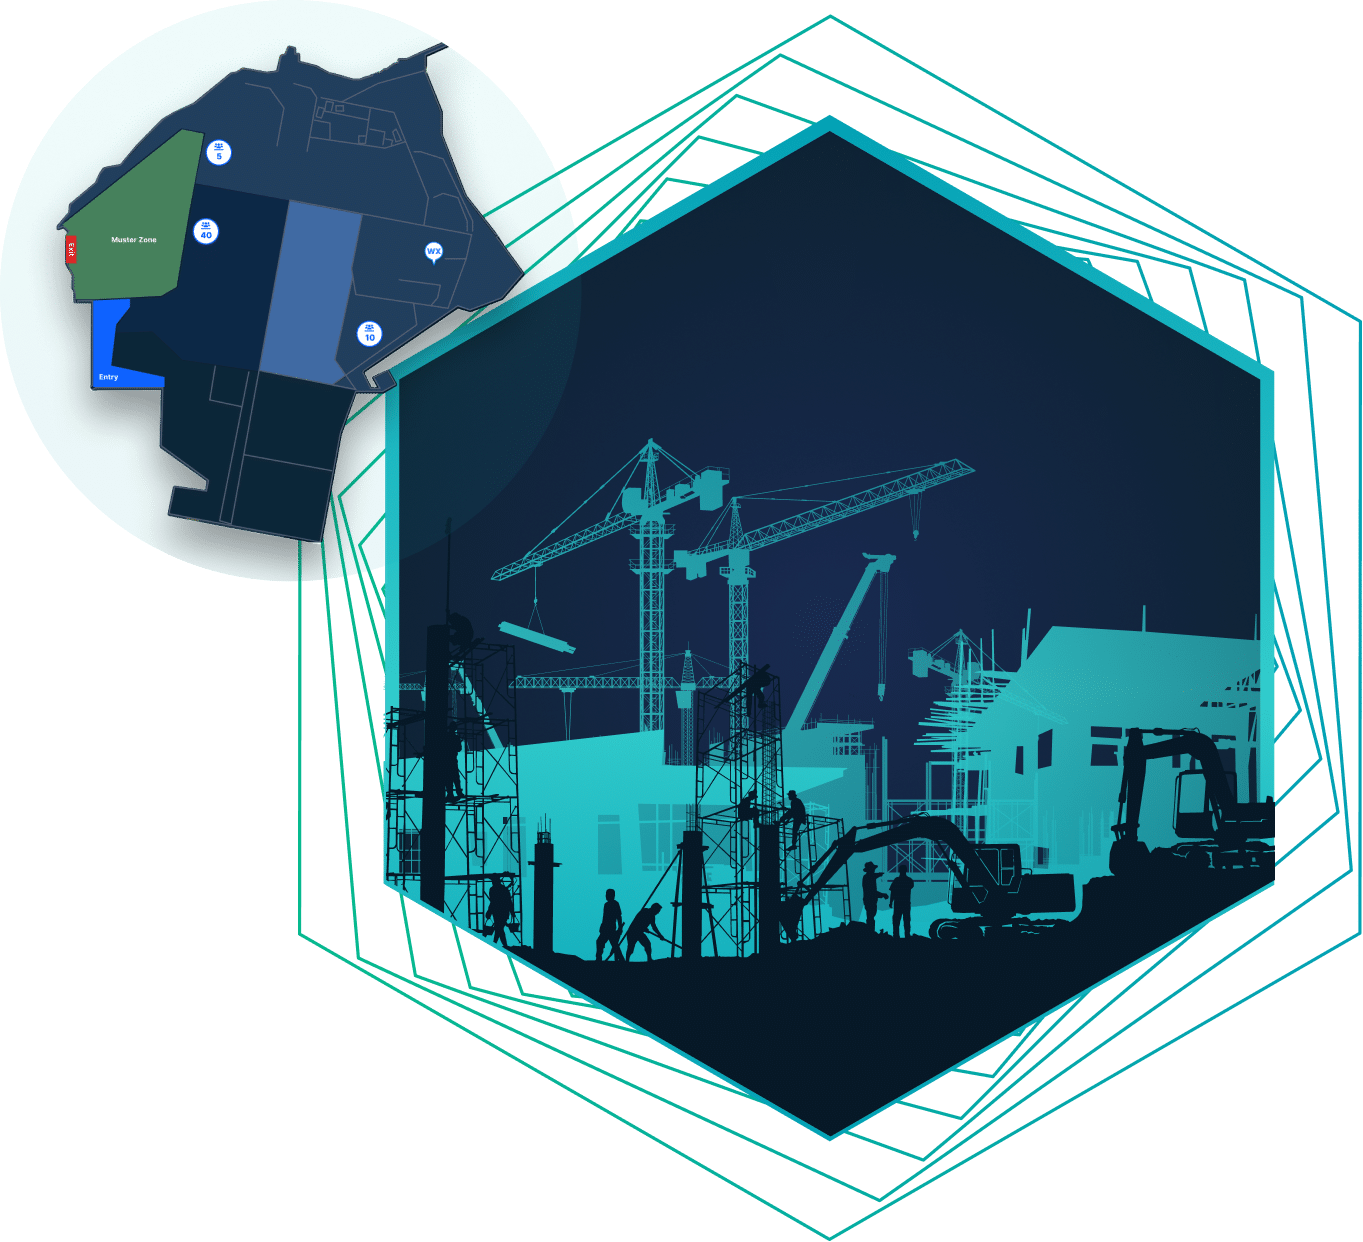 Vector image of workers on a construction site with cranes and diggers